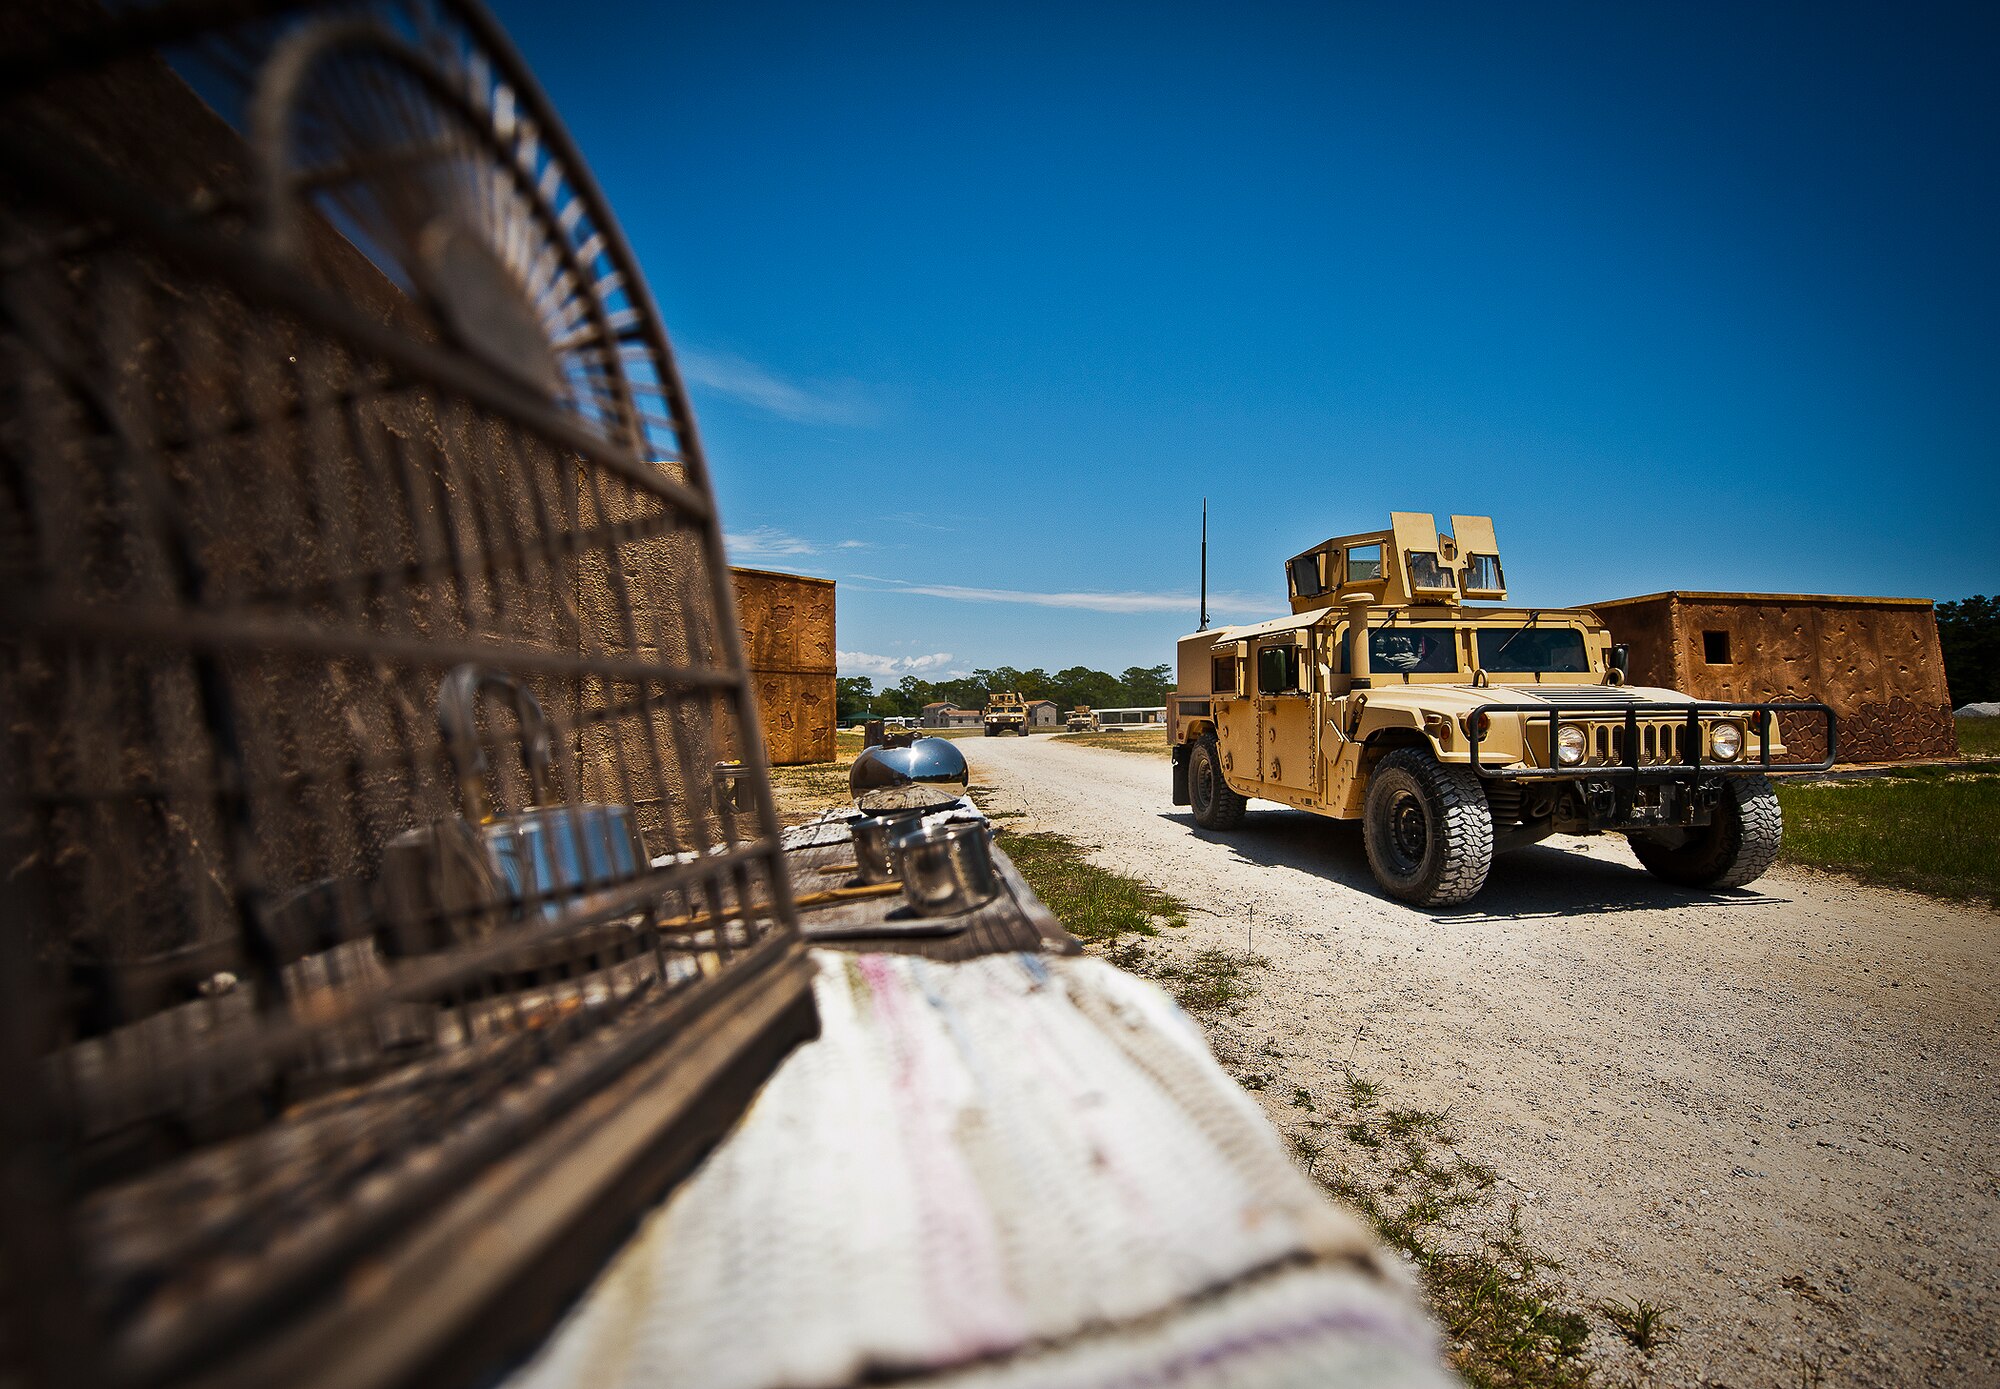 A HMMWV patrol rolls through a village outside of Base Tango during the three-day Brave Defender field training exercise May 20 at Eglin Air Force Base, Fla.  The exercise is the culmination of Air Force Materiel Command’s six-week security forces deployment training, administered by the 96th Ground Combat Training Squadron. GCTS instructors teach 10 training classes a year, which consists of improvised explosive device detection and reaction, operating in an urban environment, mission planning, land navigation and casualty care and more. More than 140 active-duty and National Guard Airmen attended this training. (U.S. Air Force photo/Samuel King Jr.)